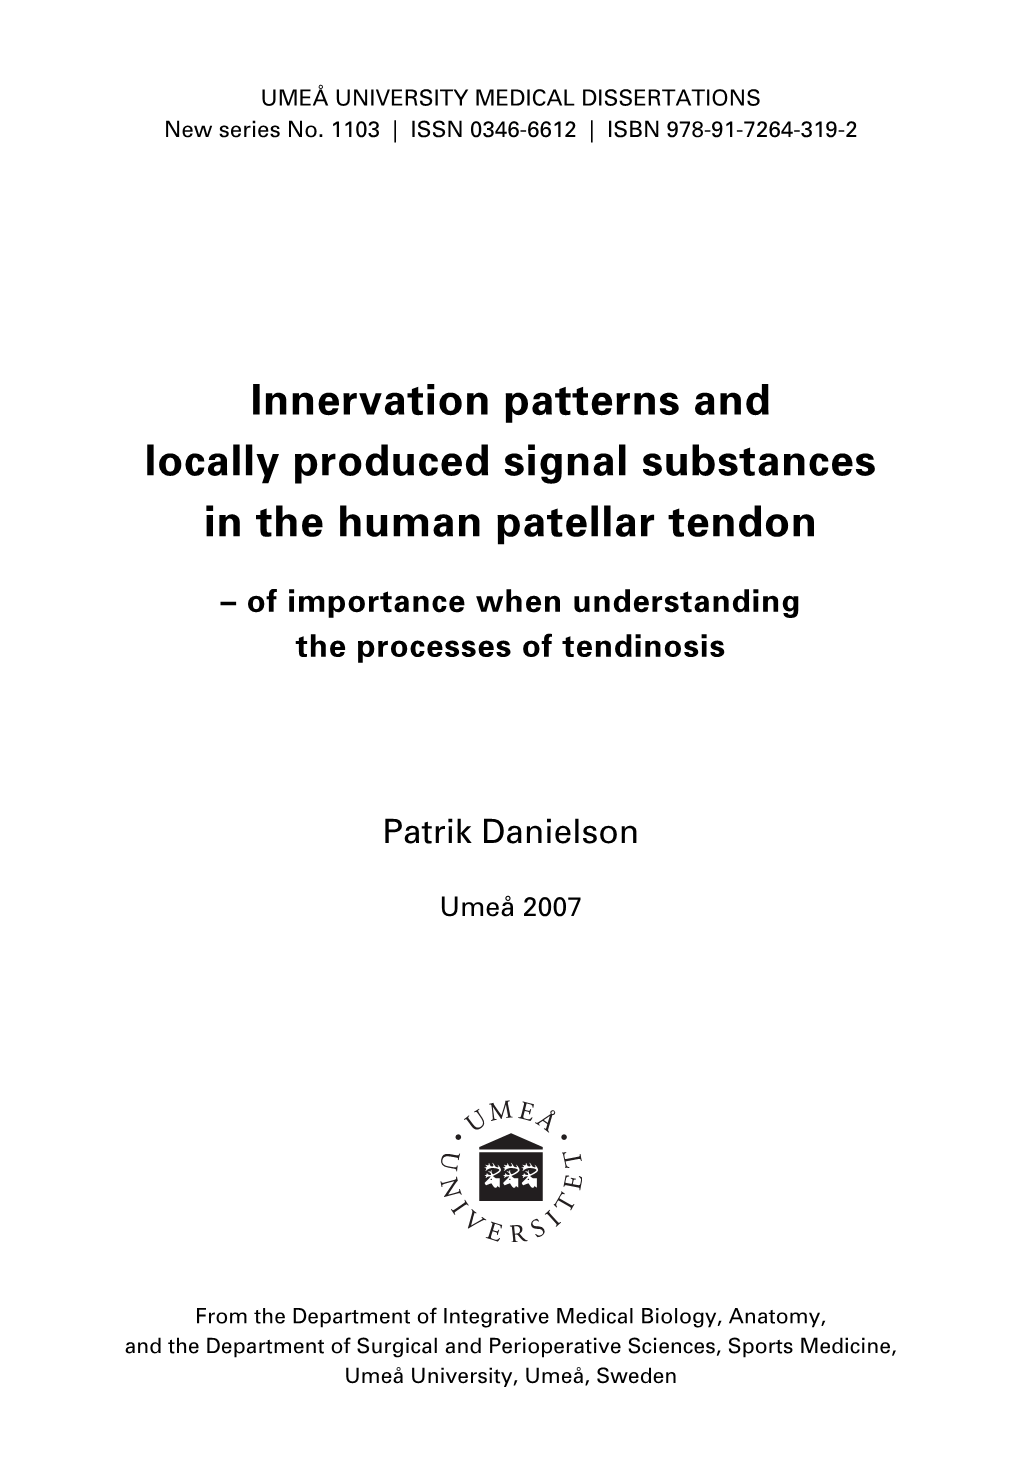 Innervation Patterns and Locally Produced Signal Substances in the Human Patellar Tendon